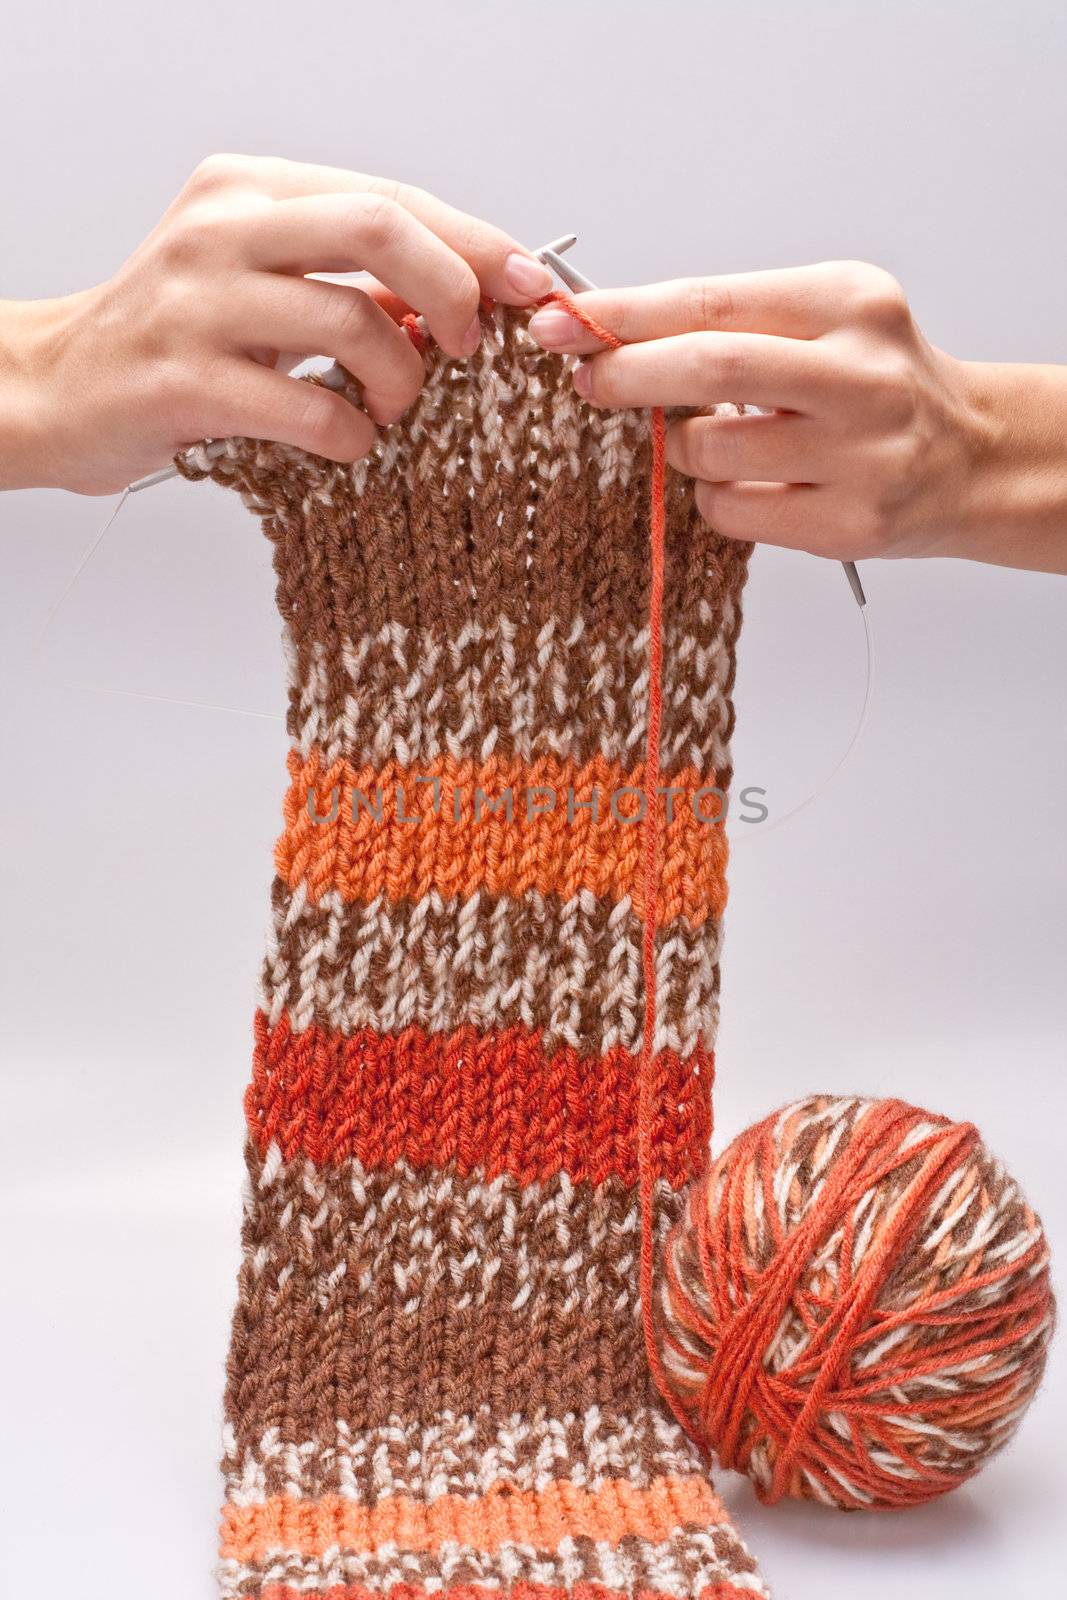 woman's hand knit knitting yarn and clothes